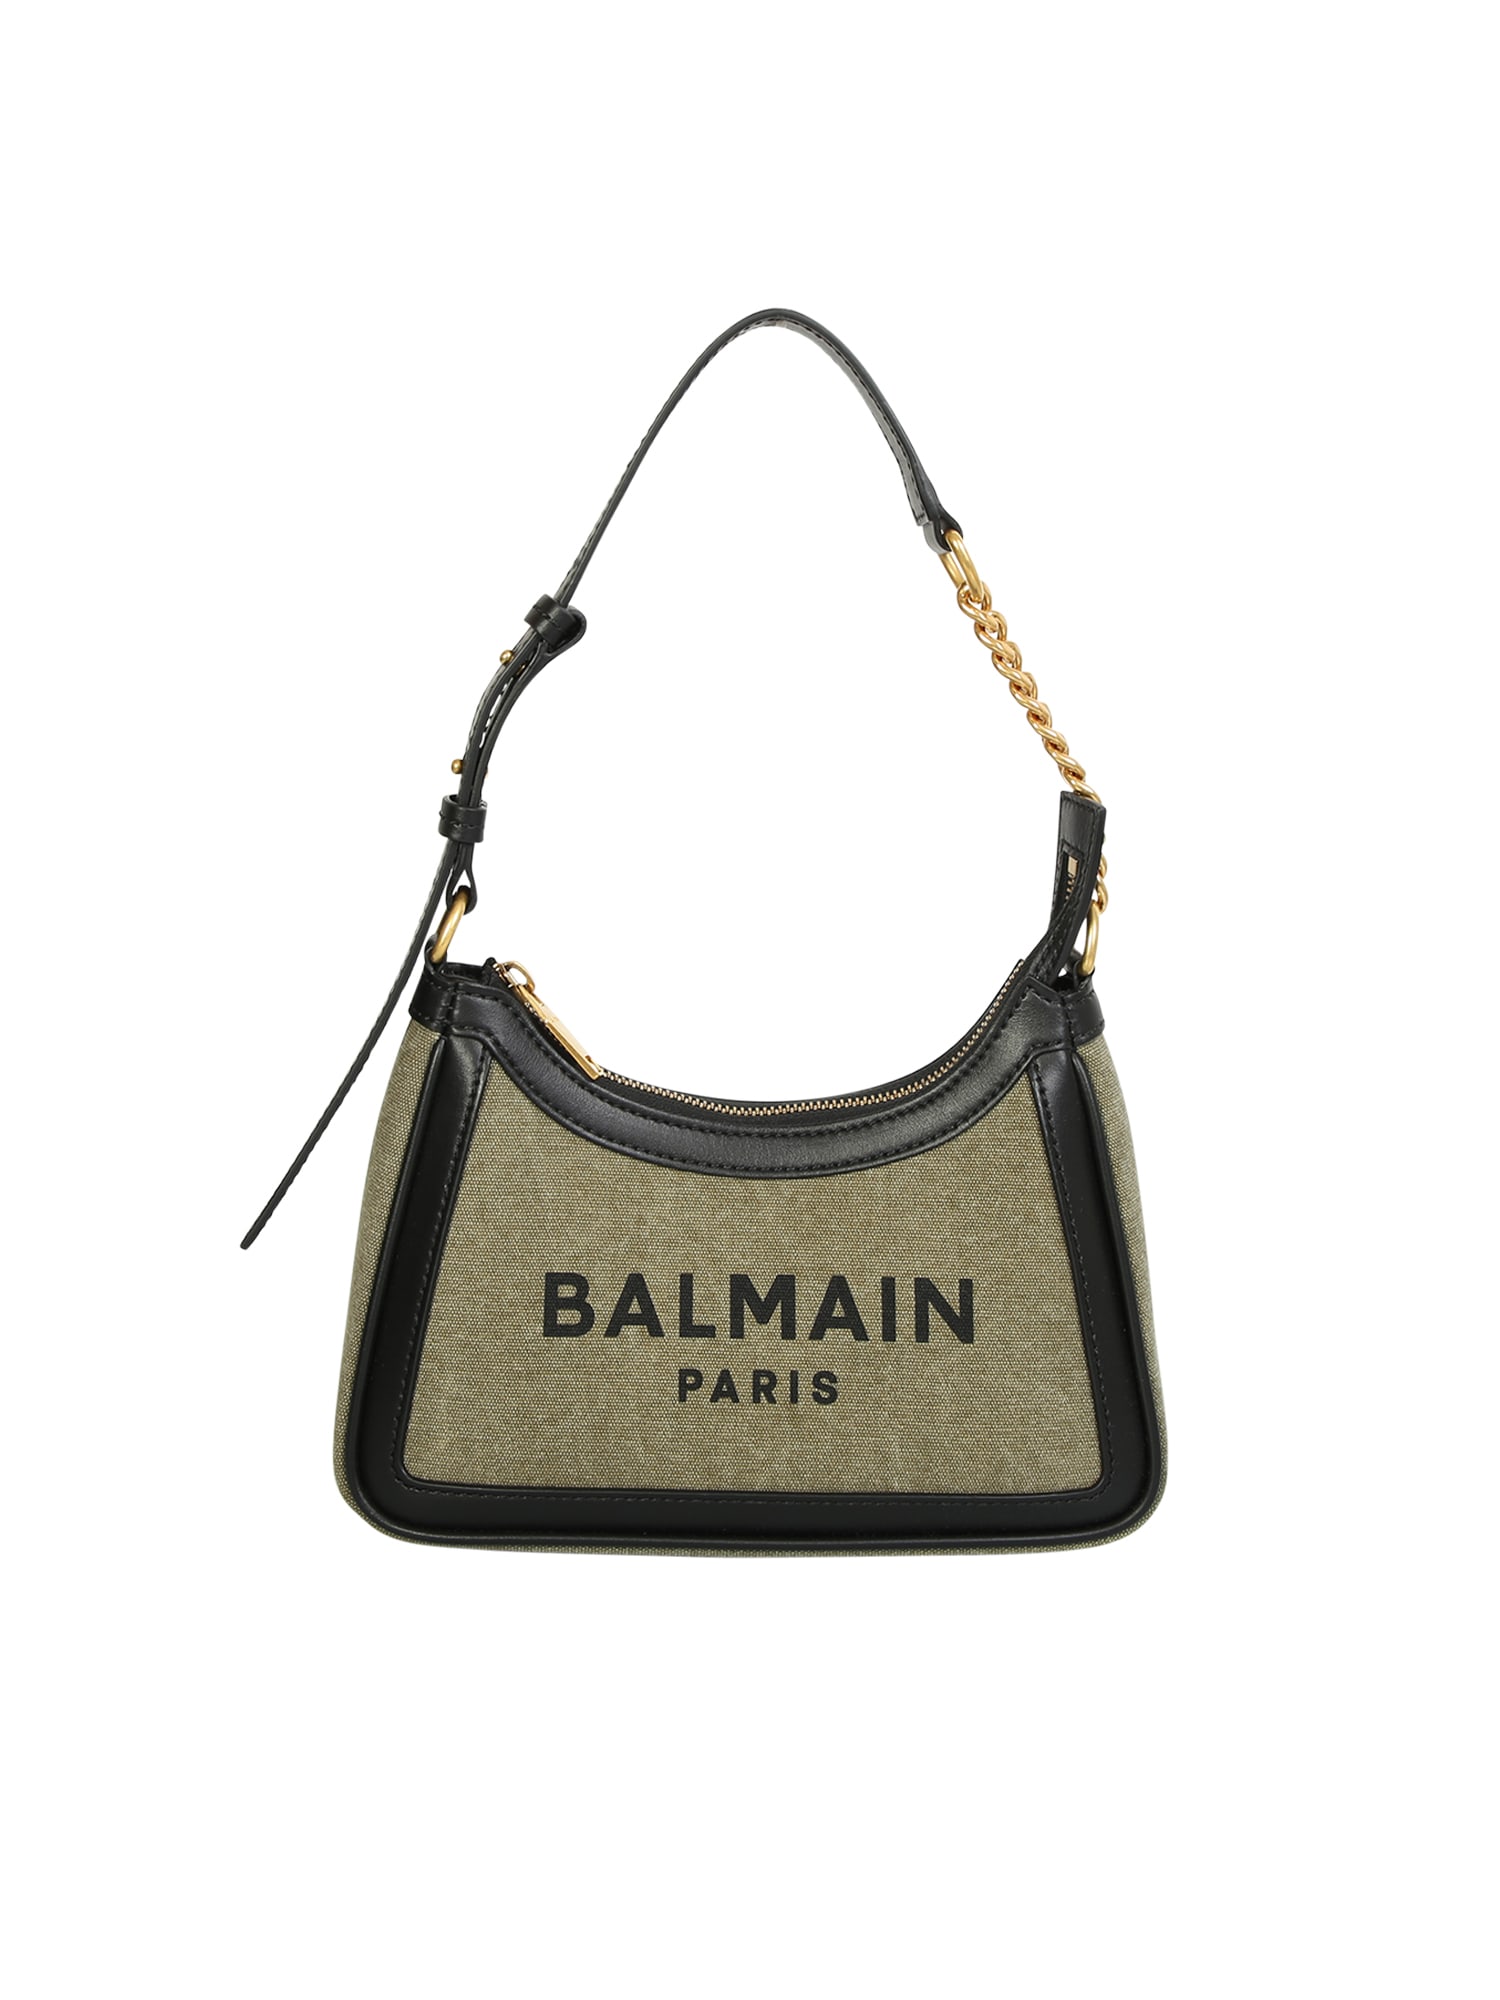 The B-army Bag By Balmain Is A Must Have For Its Curved Shape And Its Timeless Design